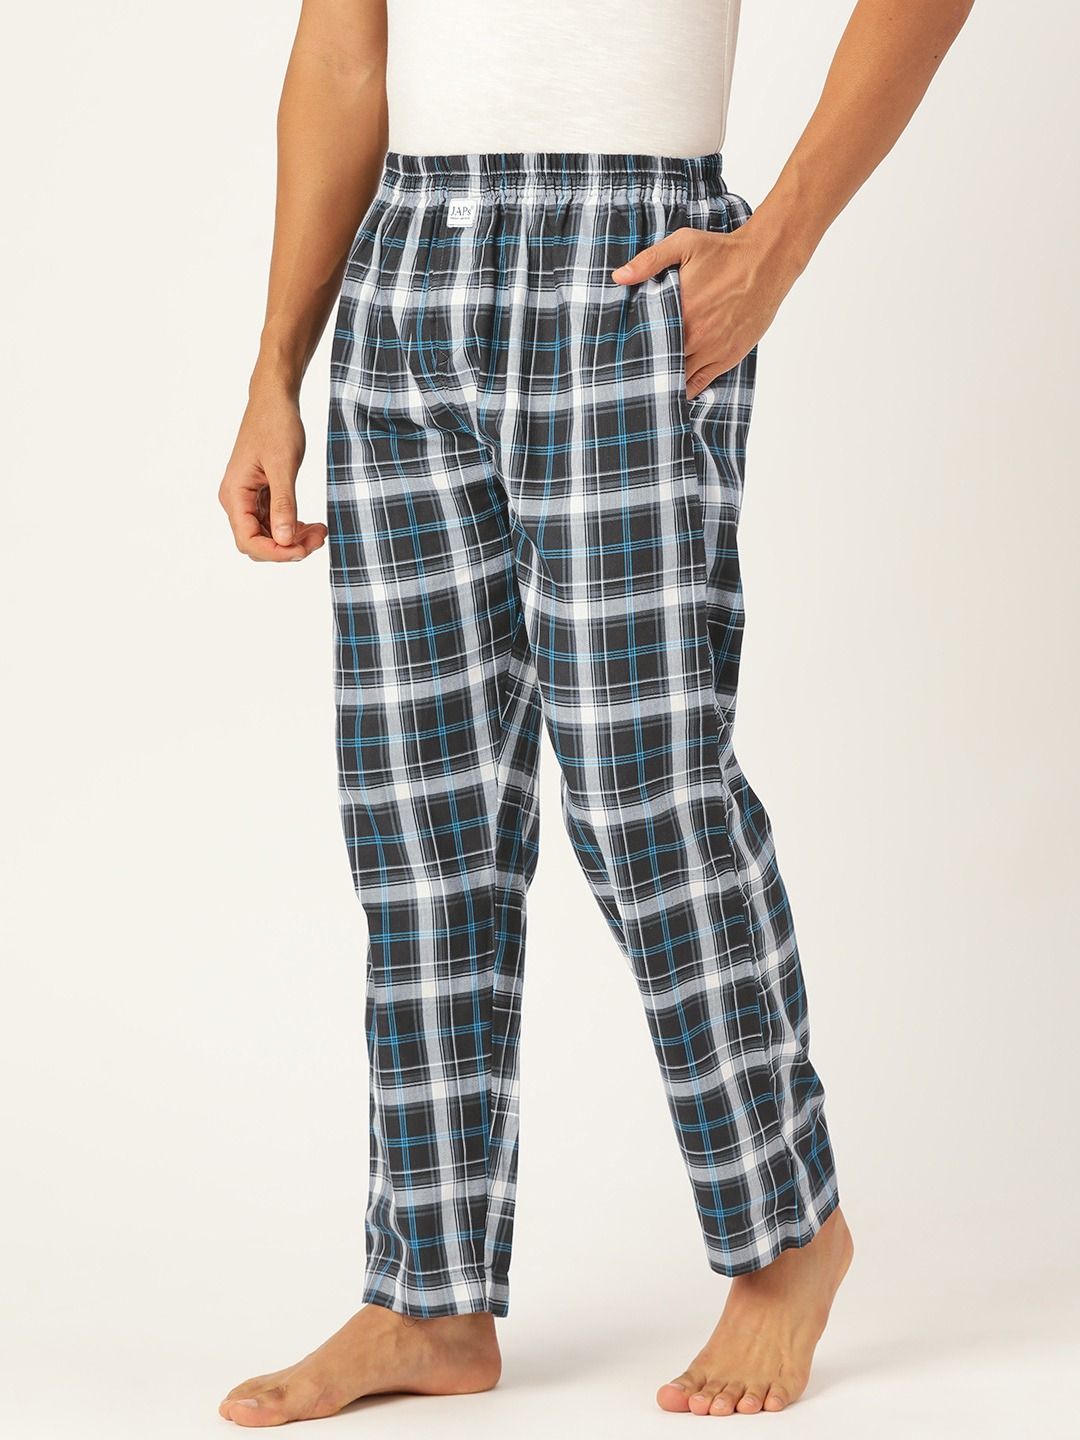 Buy The Cotton Company Mens Multicolor Checkered 100 Cotton Pajama Lounge  Pants Medium Online at Best Prices in India  JioMart